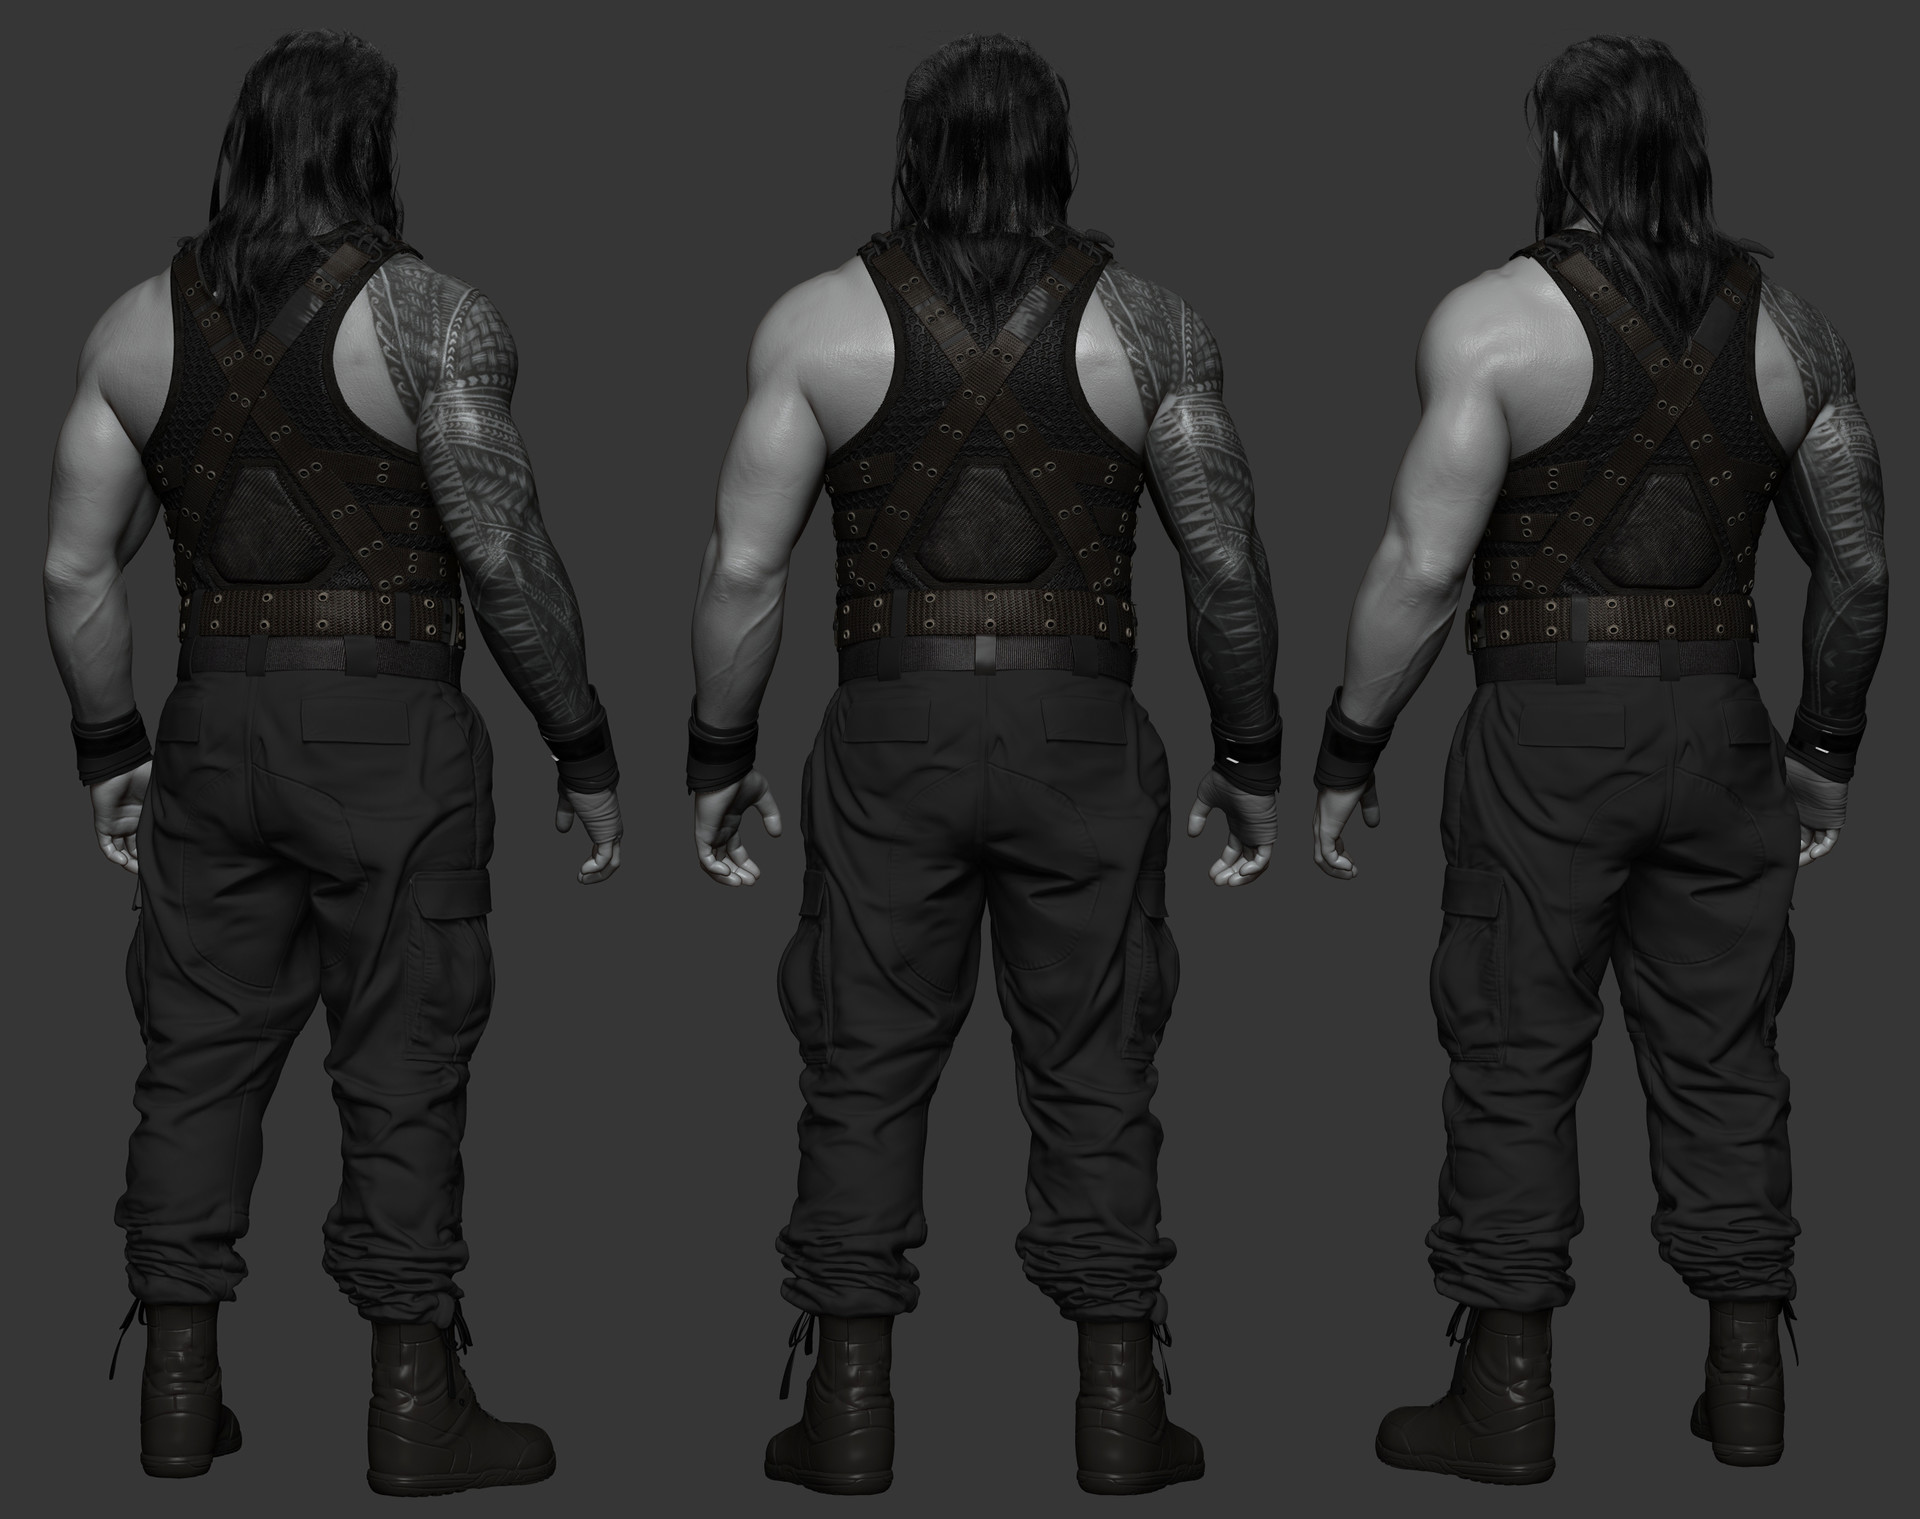 Roman Reigns 2020 PNG Render 2 by SuperAjStylesNick on DeviantArt